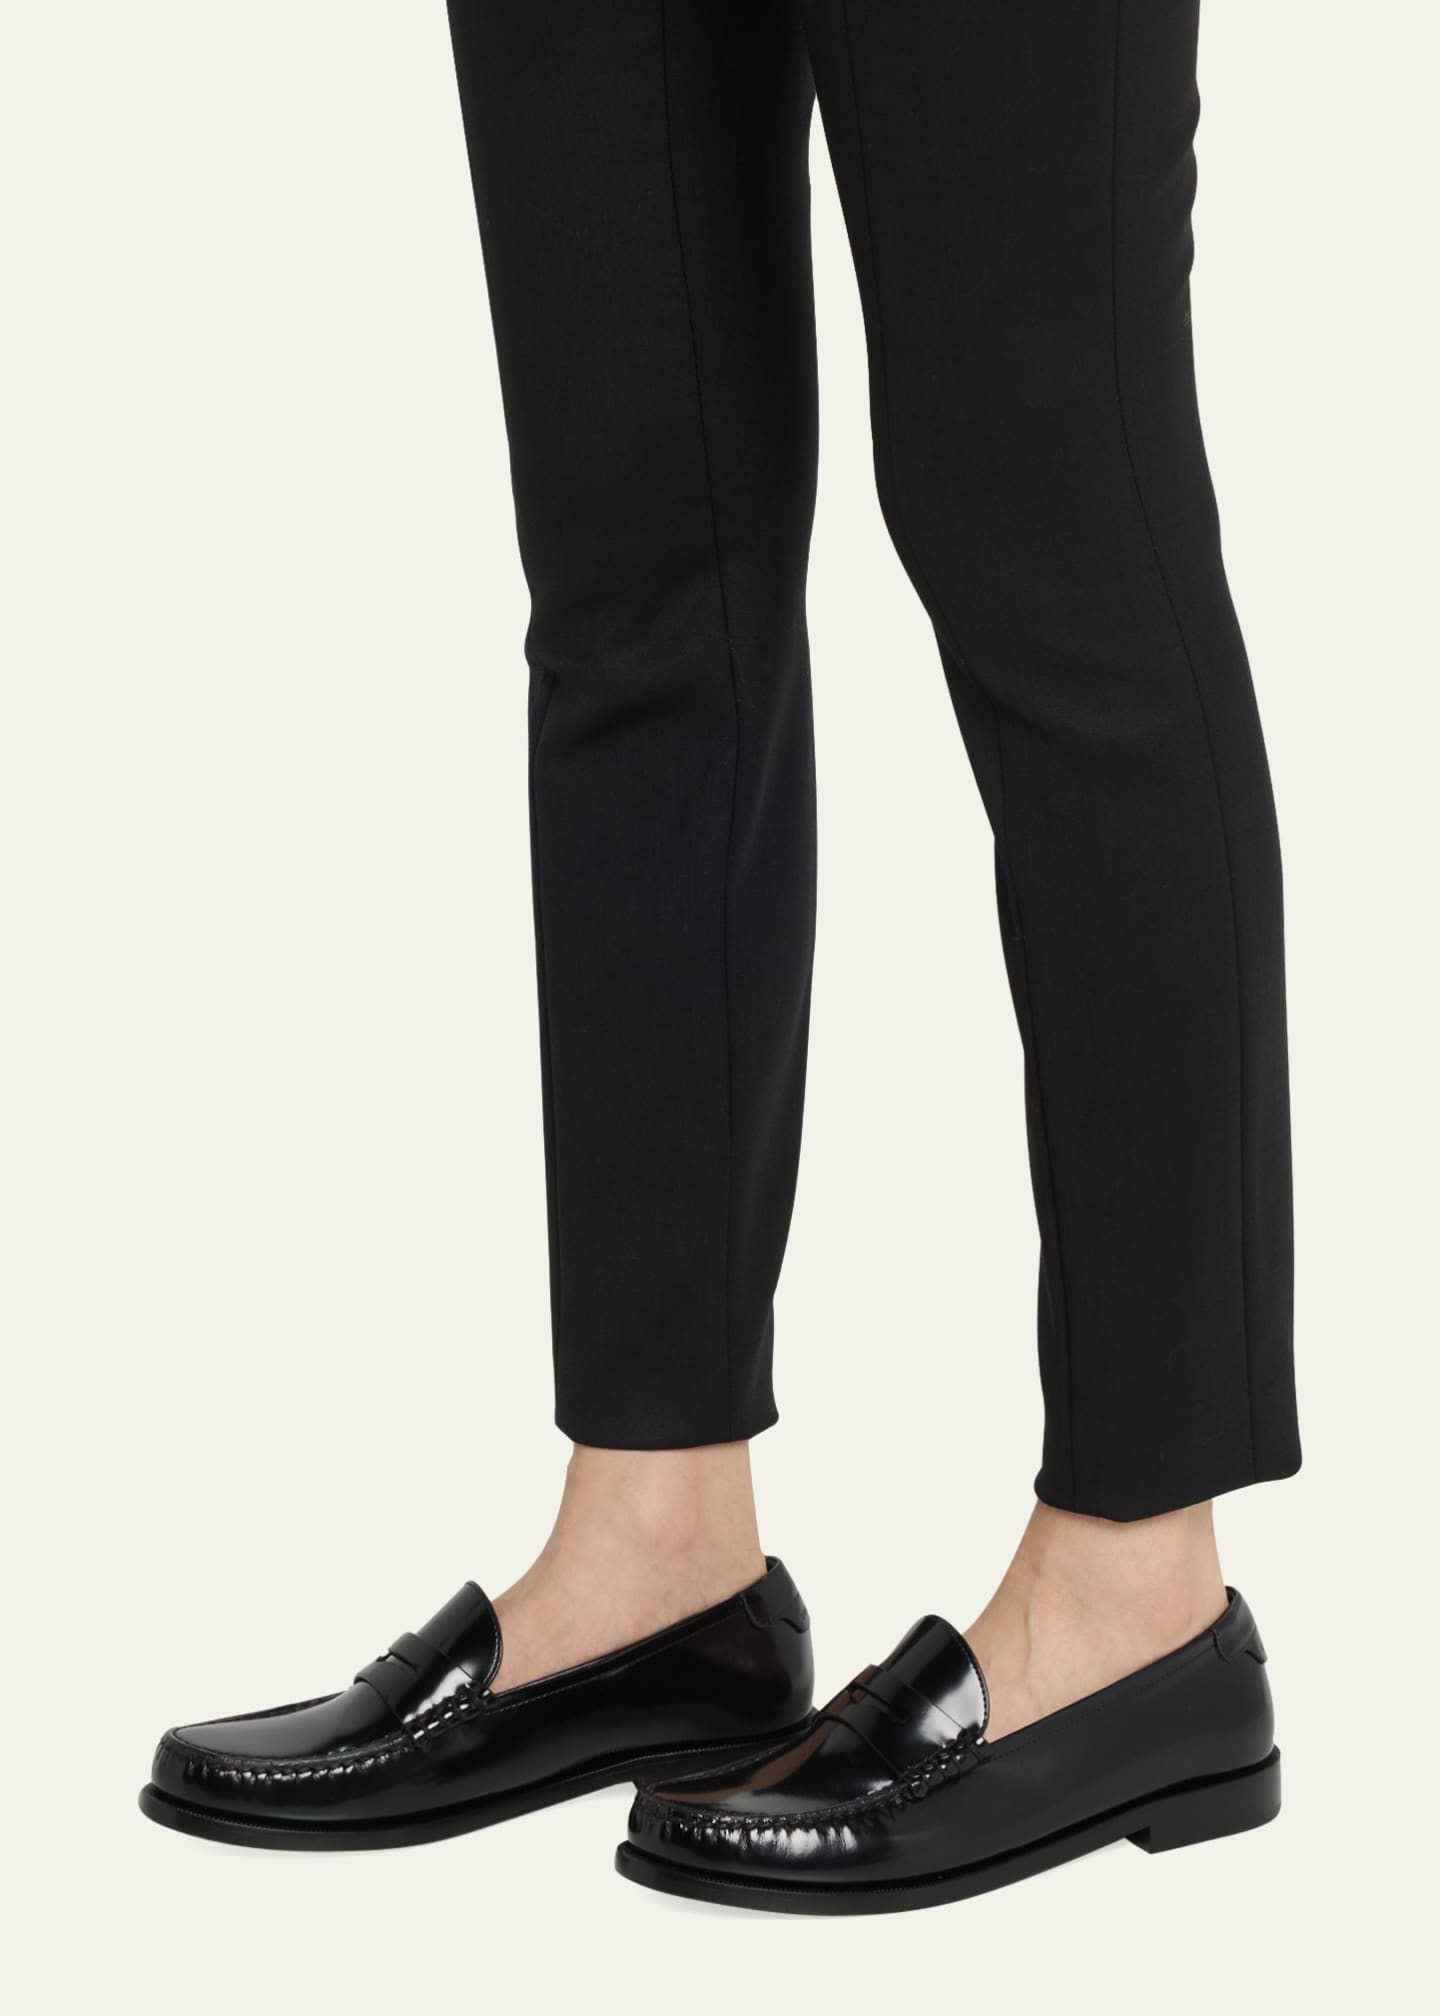 Patent leather loafers in black - Saint Laurent